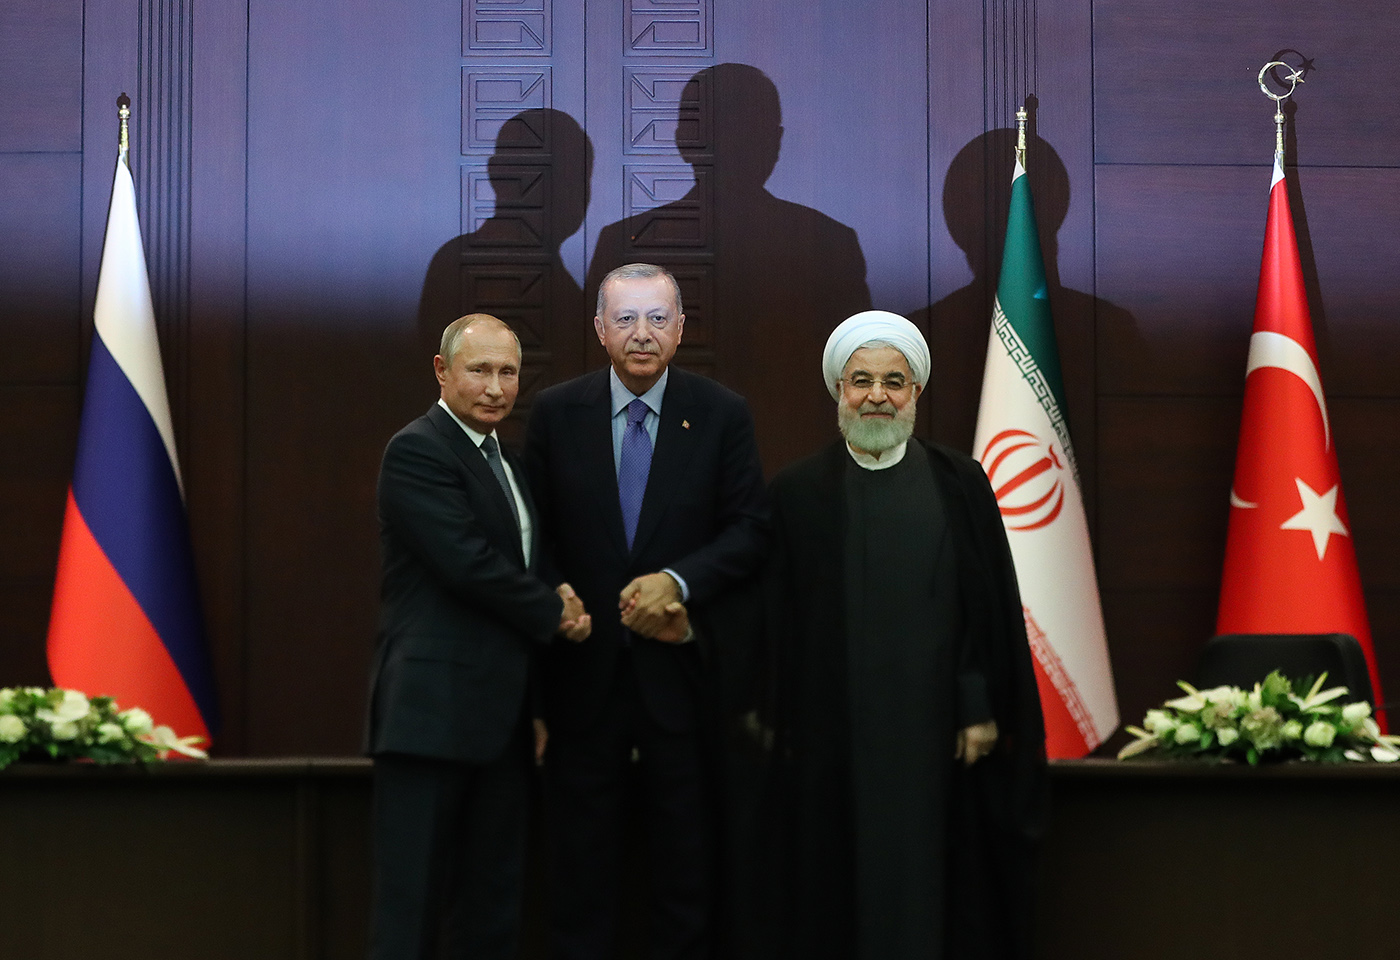 Turkish President Recep Tayyip Erdogan (C), Russian President Vladimir Putin (L) and Iranian President Hassan Rouhani (R) pose for media during a press conference after their summit in Ankara, Turkey, 16 September 2019.